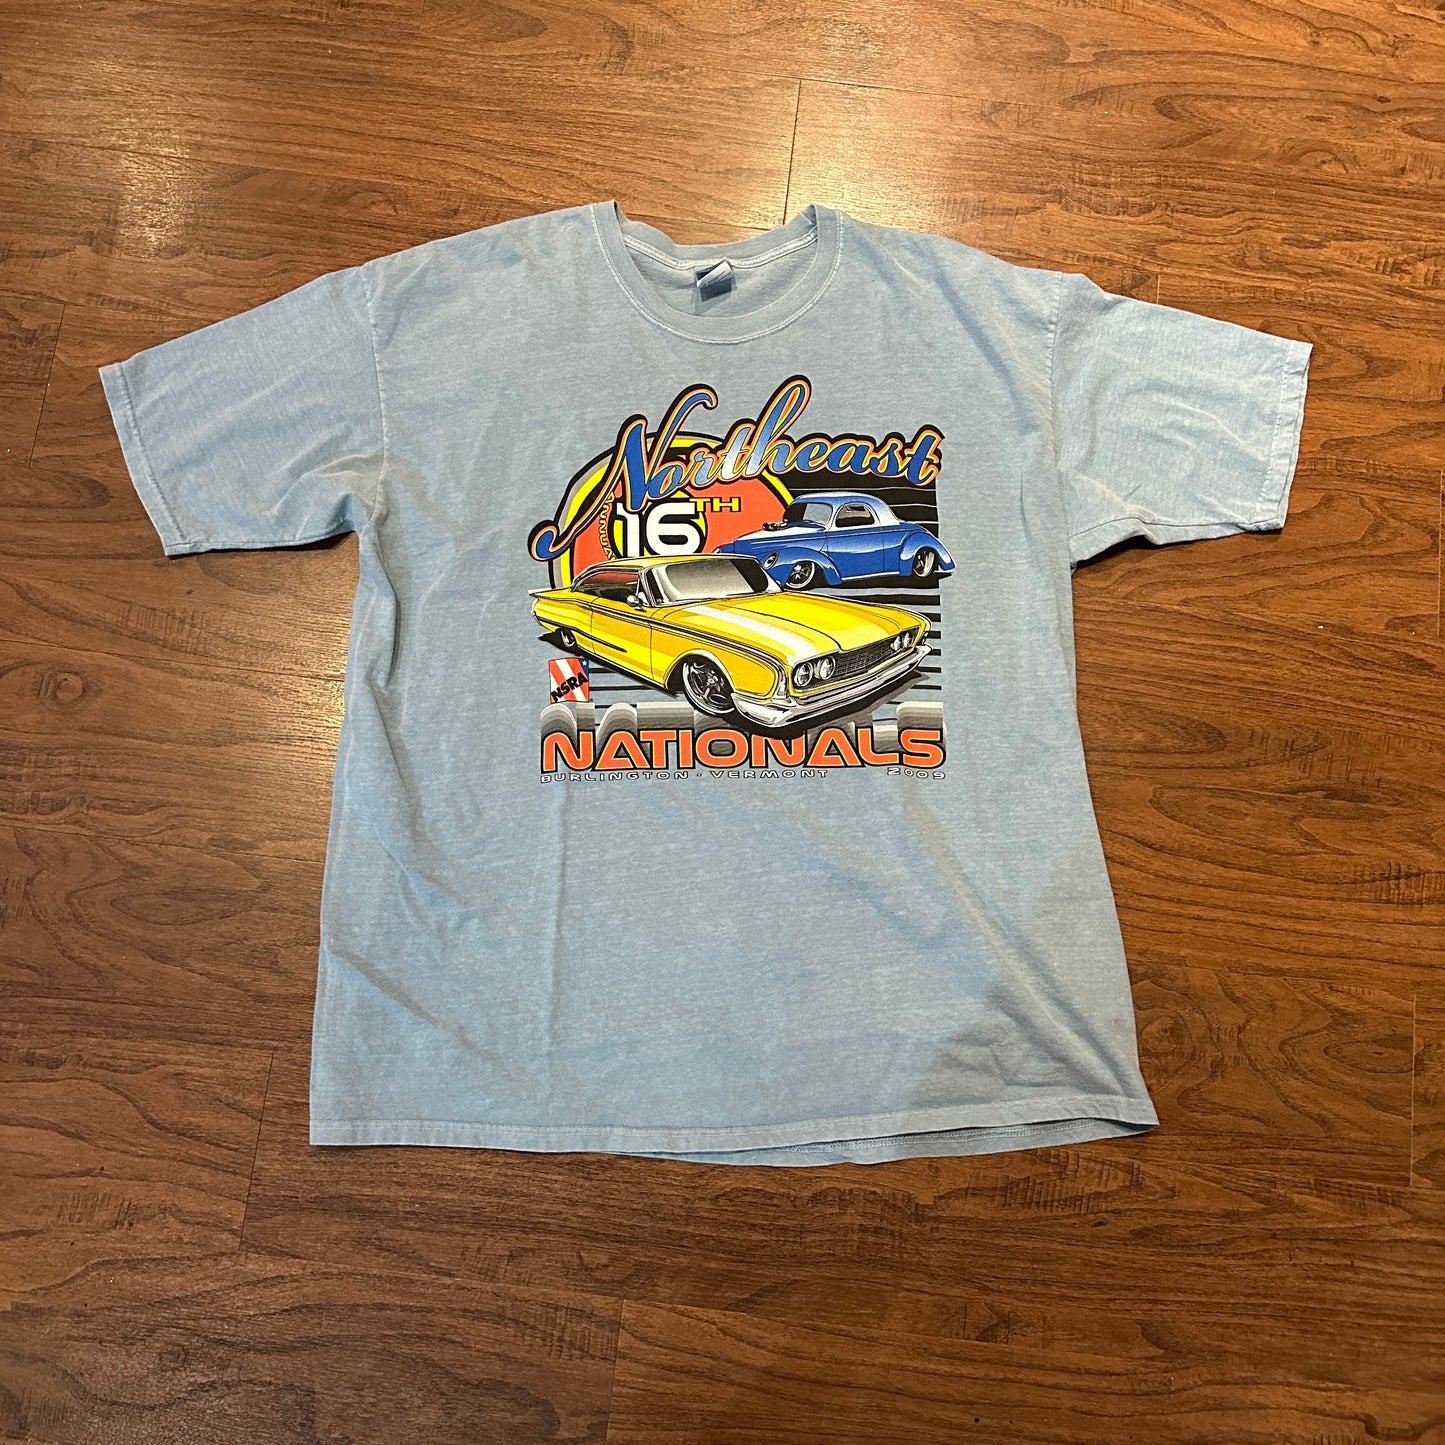 *VINTAGE* Northeast 16th Nationals Tee  (FITS X-LARGE)